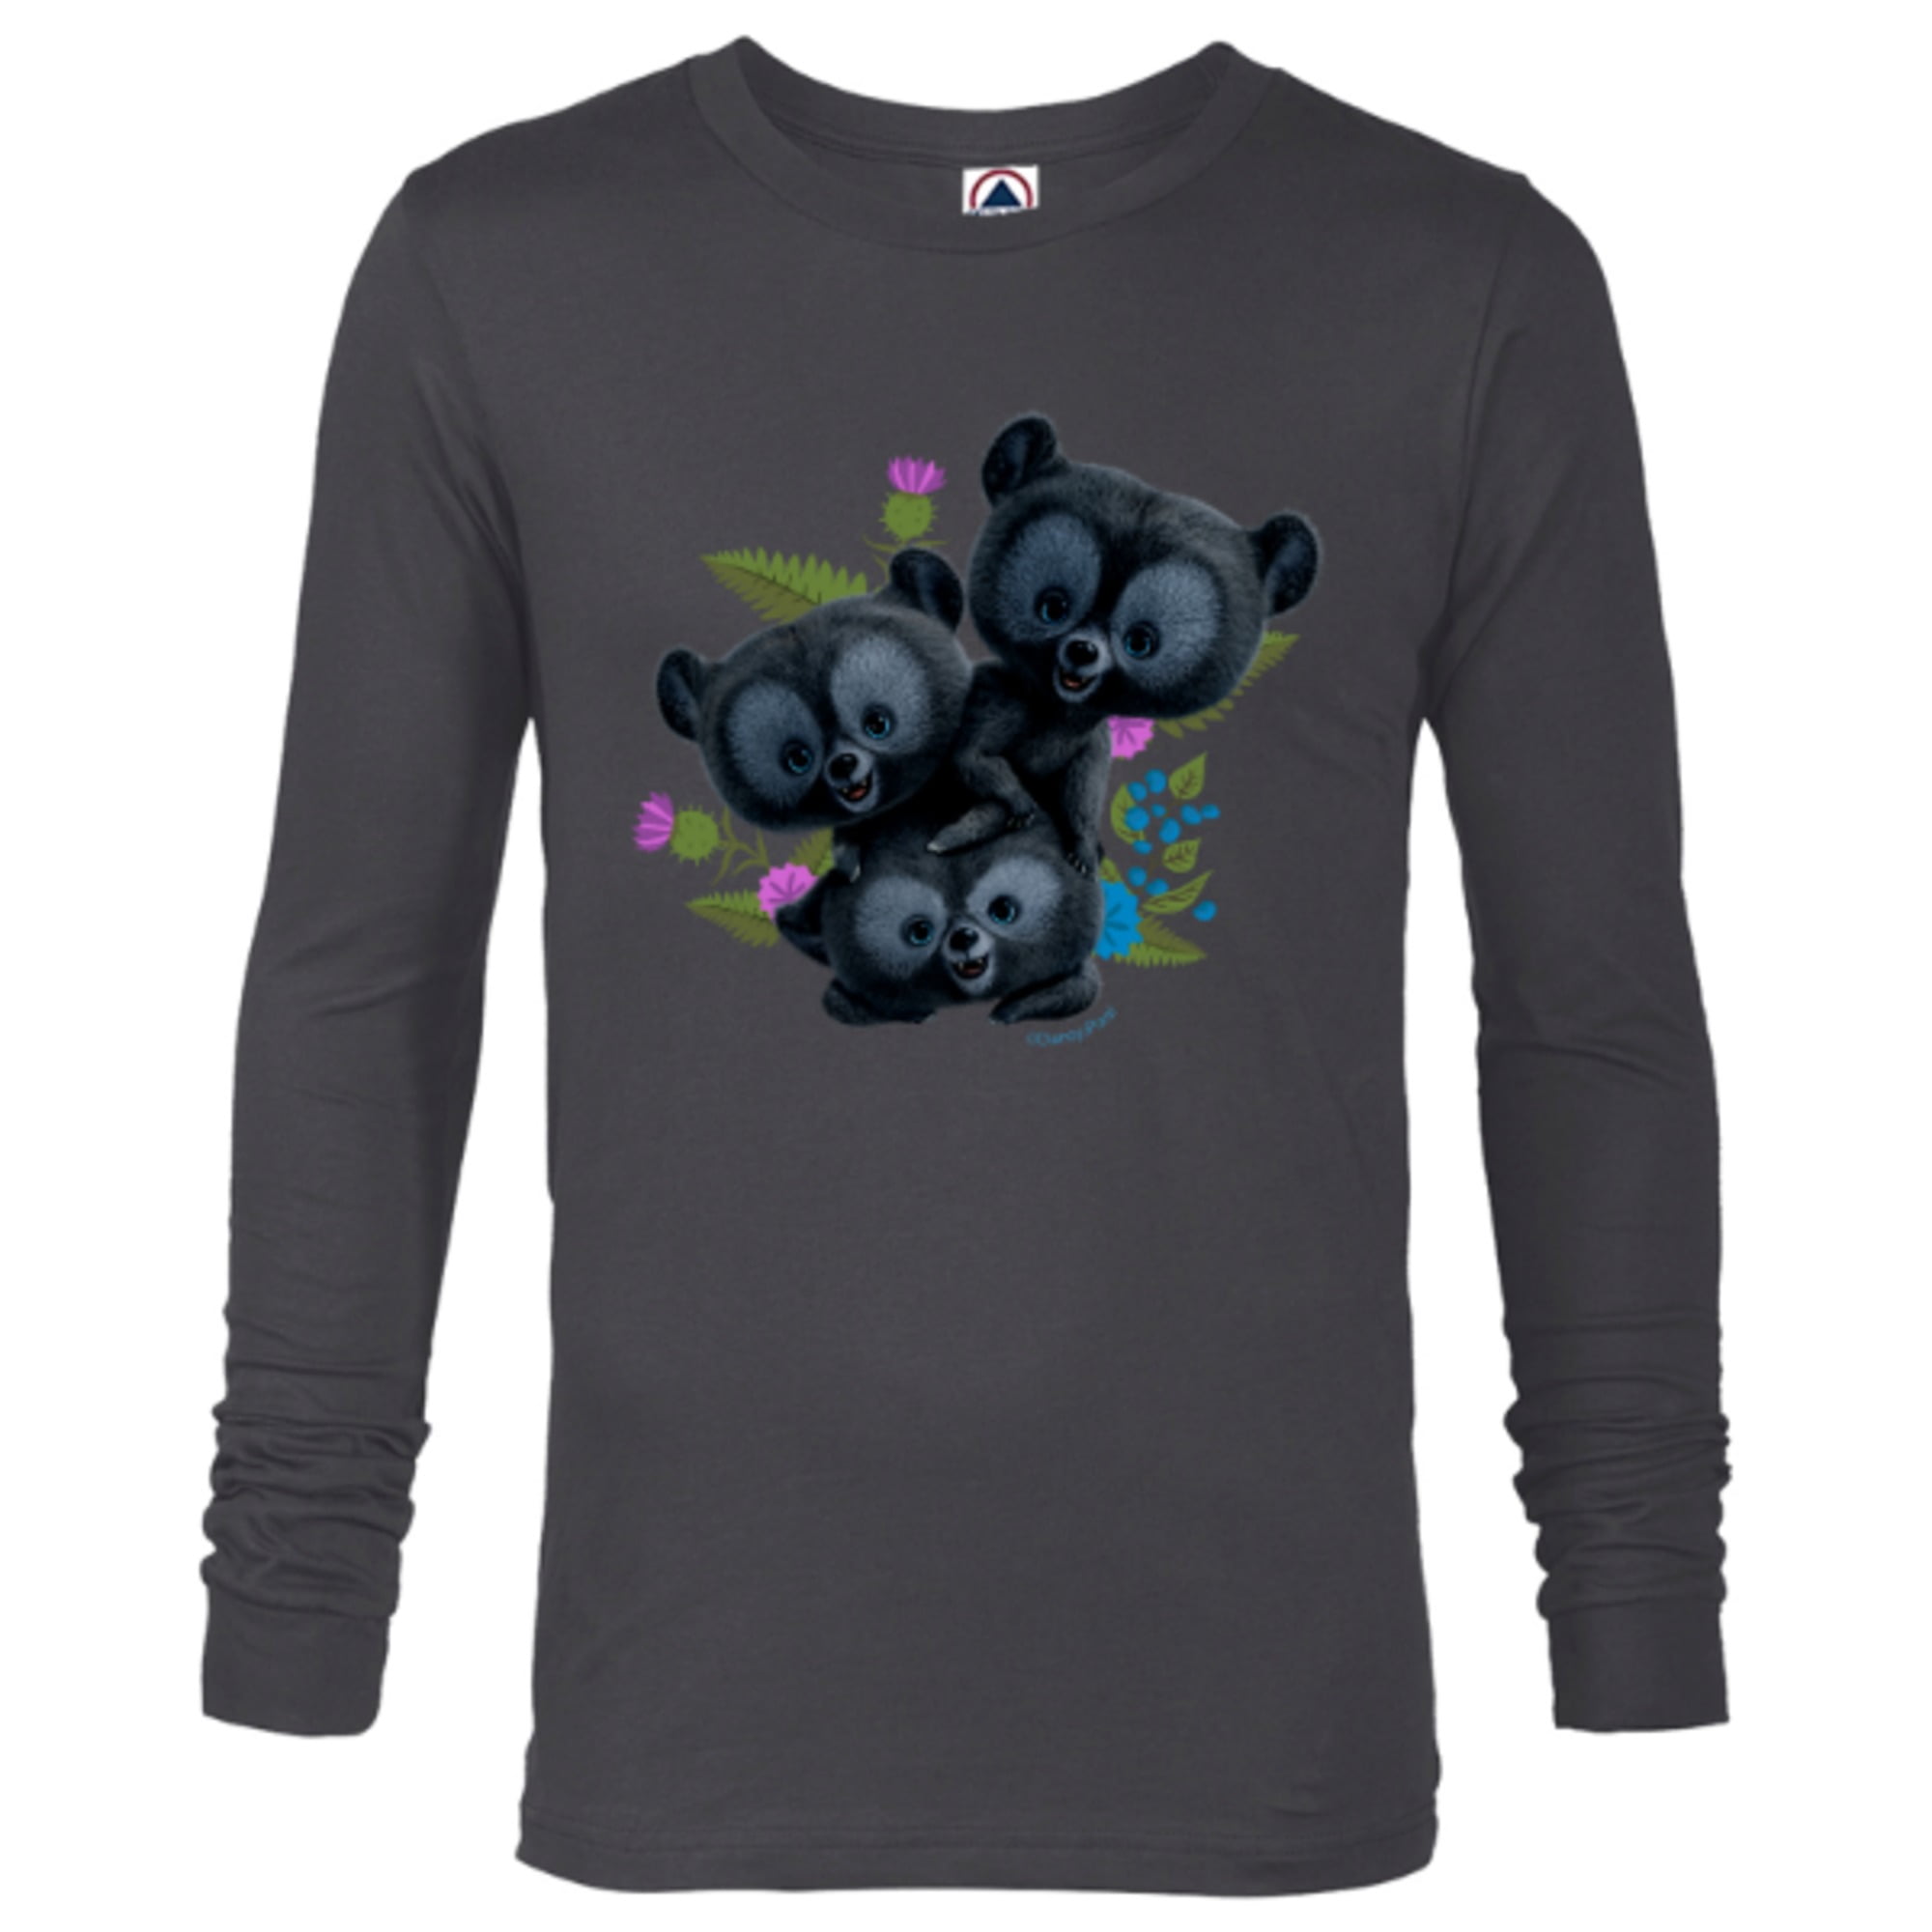 Disney and Pixar’s Brave Bear Cubs - Long Sleeve T-Shirt for Men -  Customized-Charcoal Heather